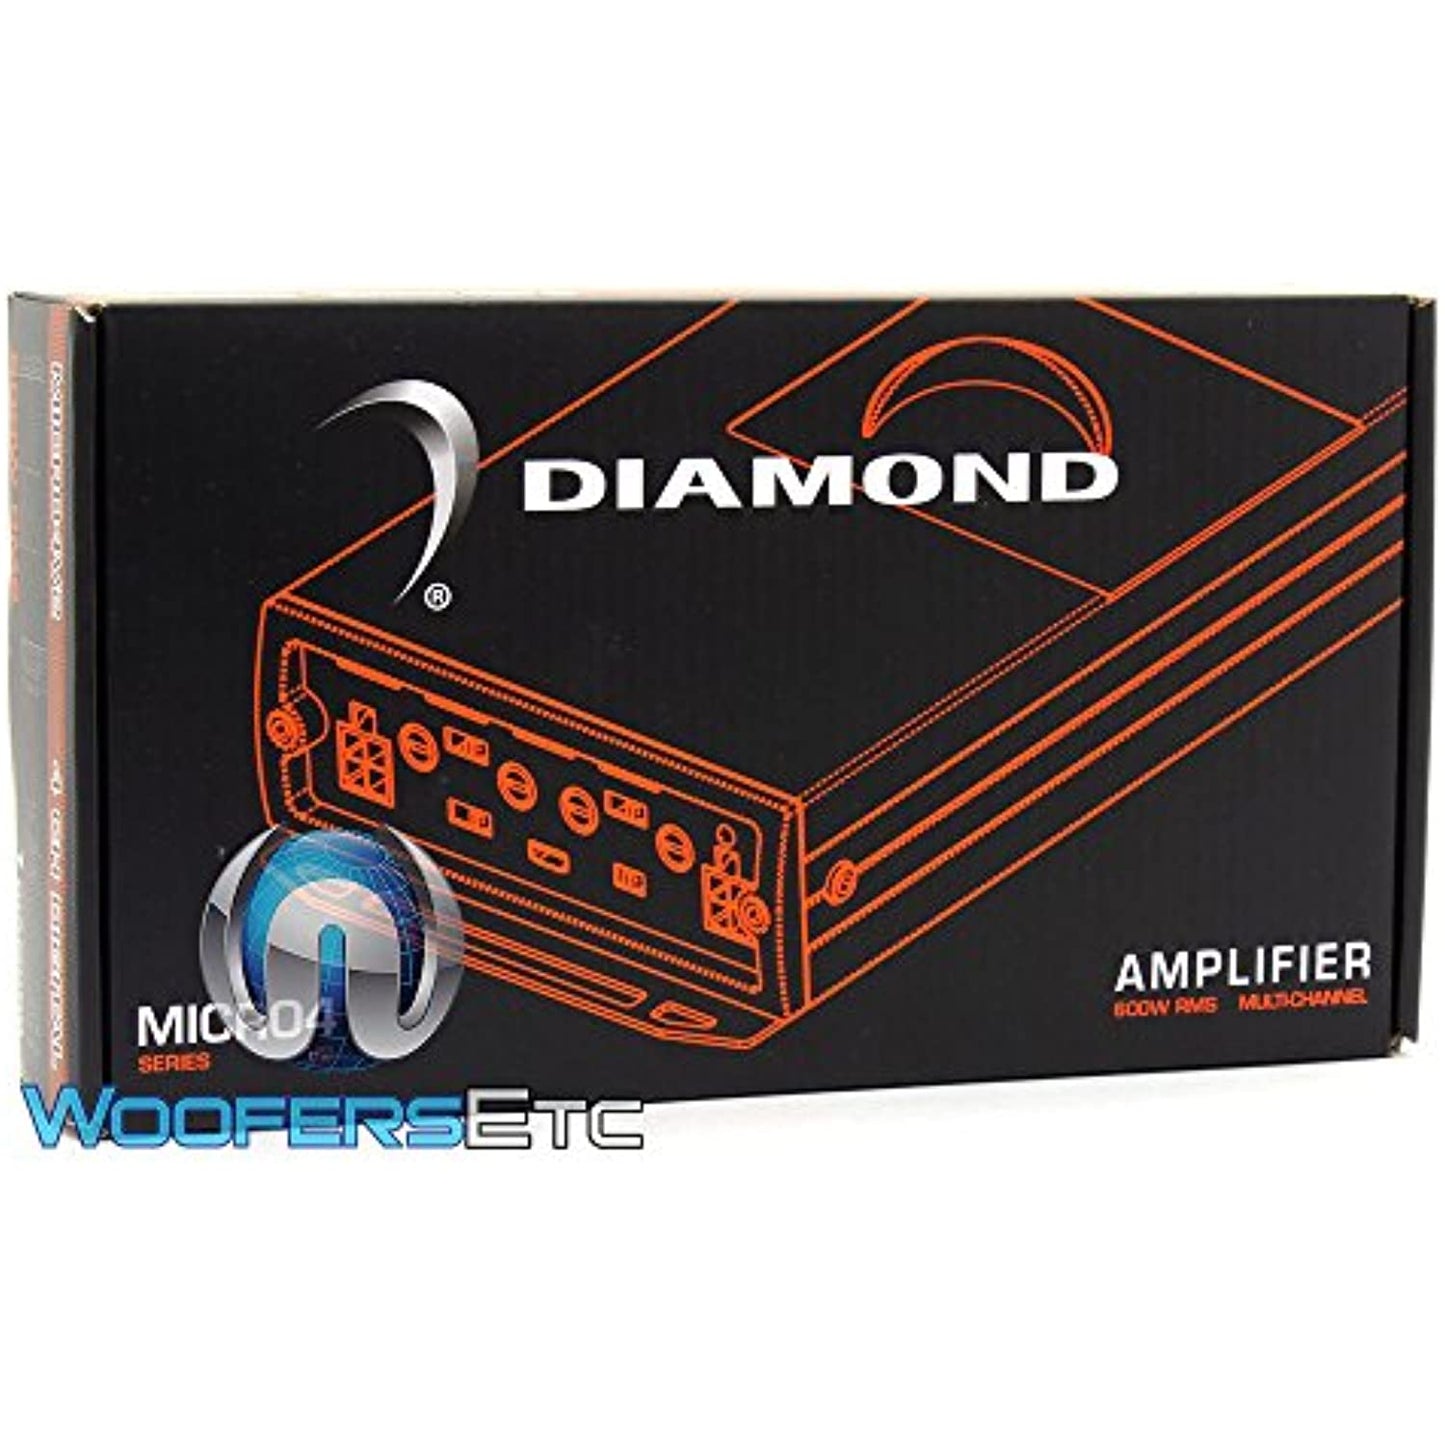 MICRO4V2 4-CHANNEL MOTORCYCLE 600W RMS 4-CH AMPLIFIER FOR HARLEY + V10-D104K